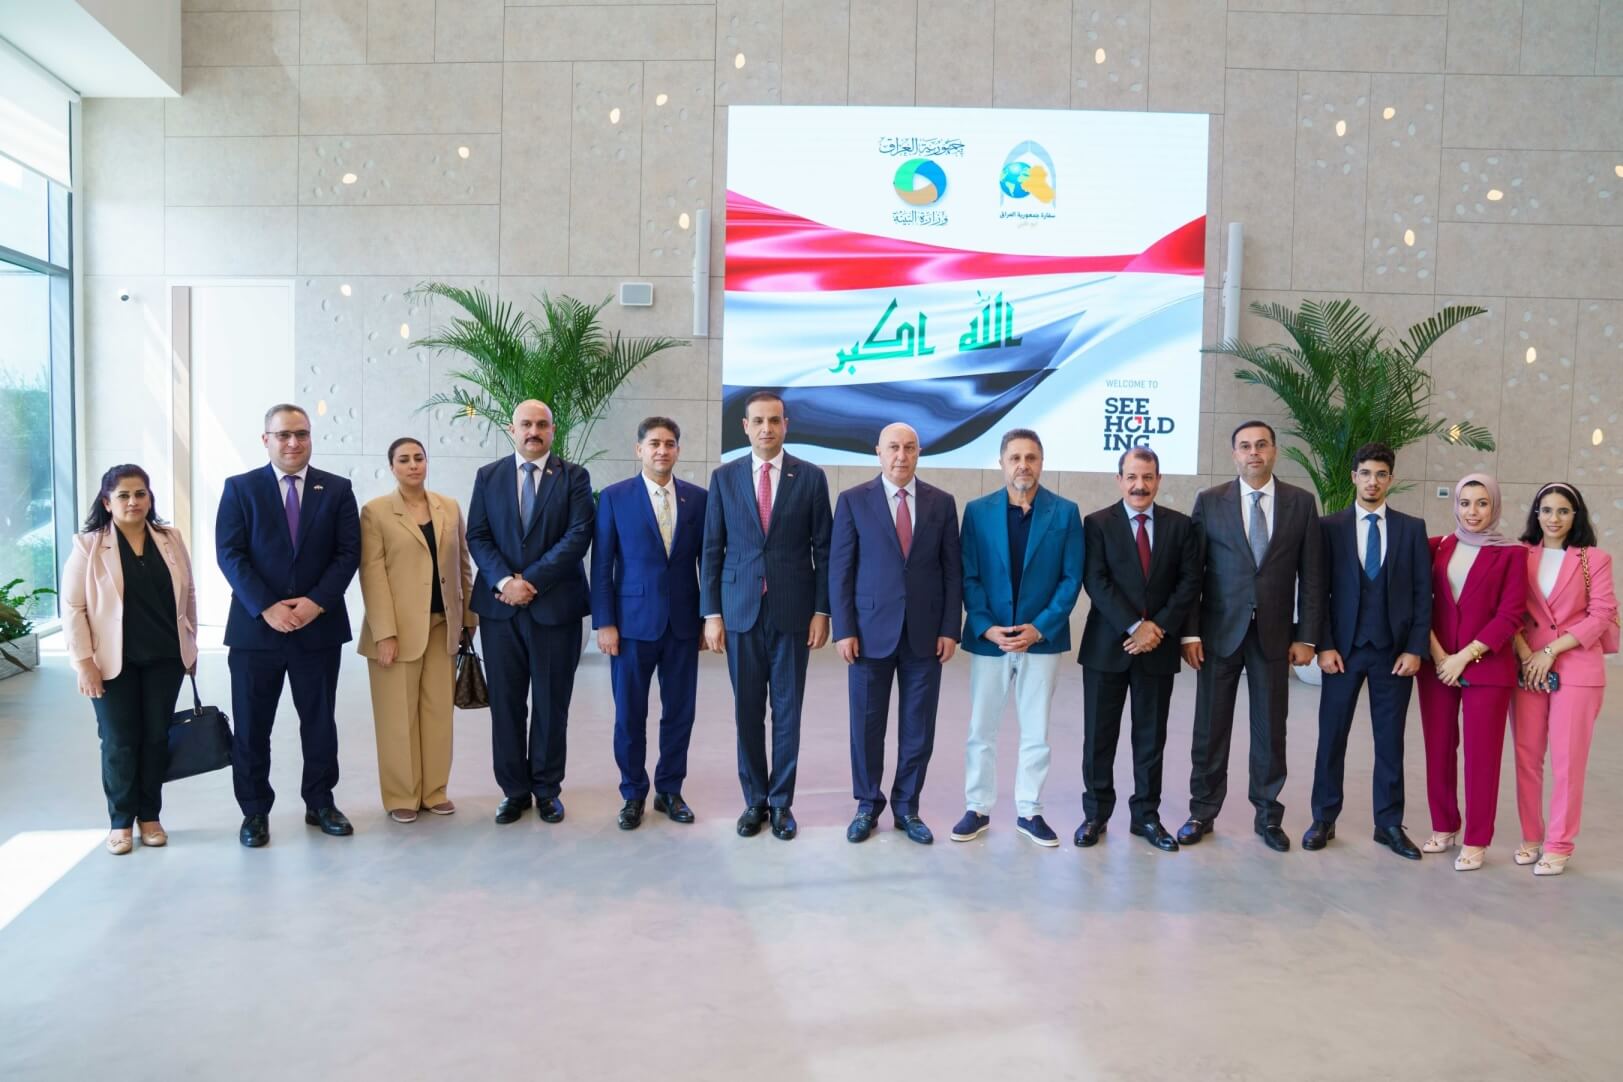 Iraq’s Minister of Environment visits The Sustainable City with a high-profile delegation